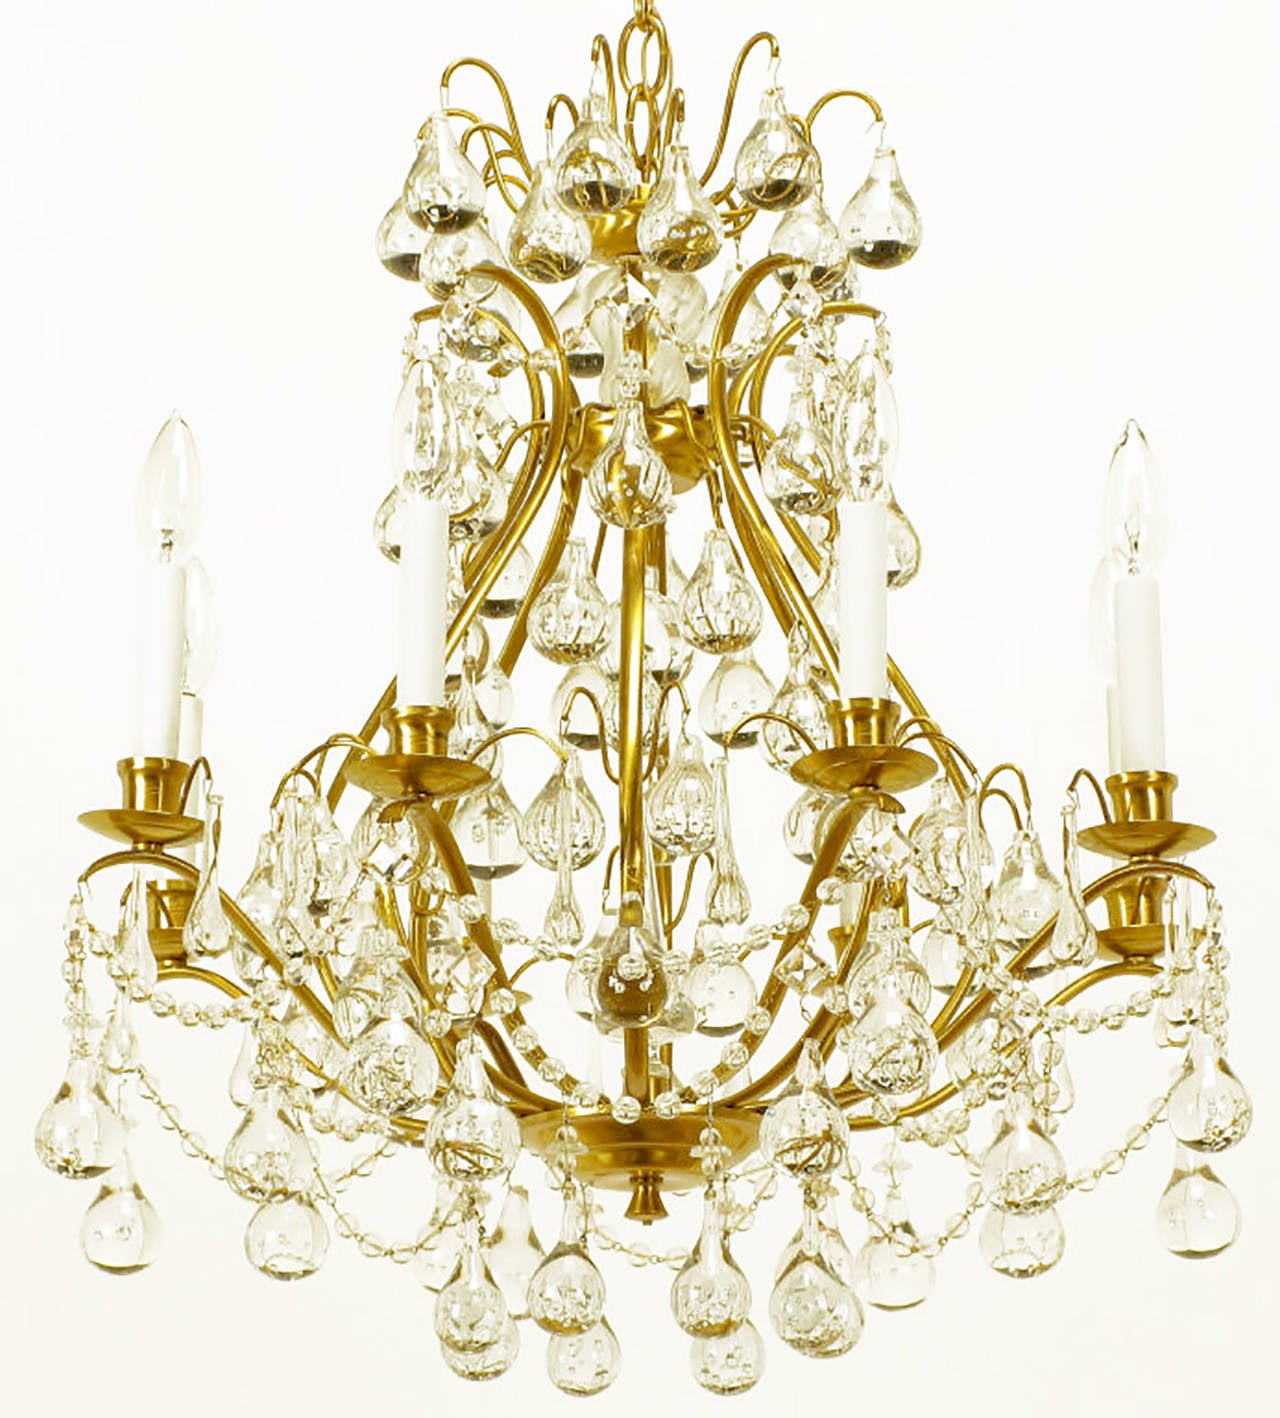 Striking eight-arm chandelier in brushed brass, with a gourd form open center, crystal swagged beading and rain drop bubble crystals adding a modern touch. Multiple tiers of crystals give the appearance of water gently dripping from the brushed